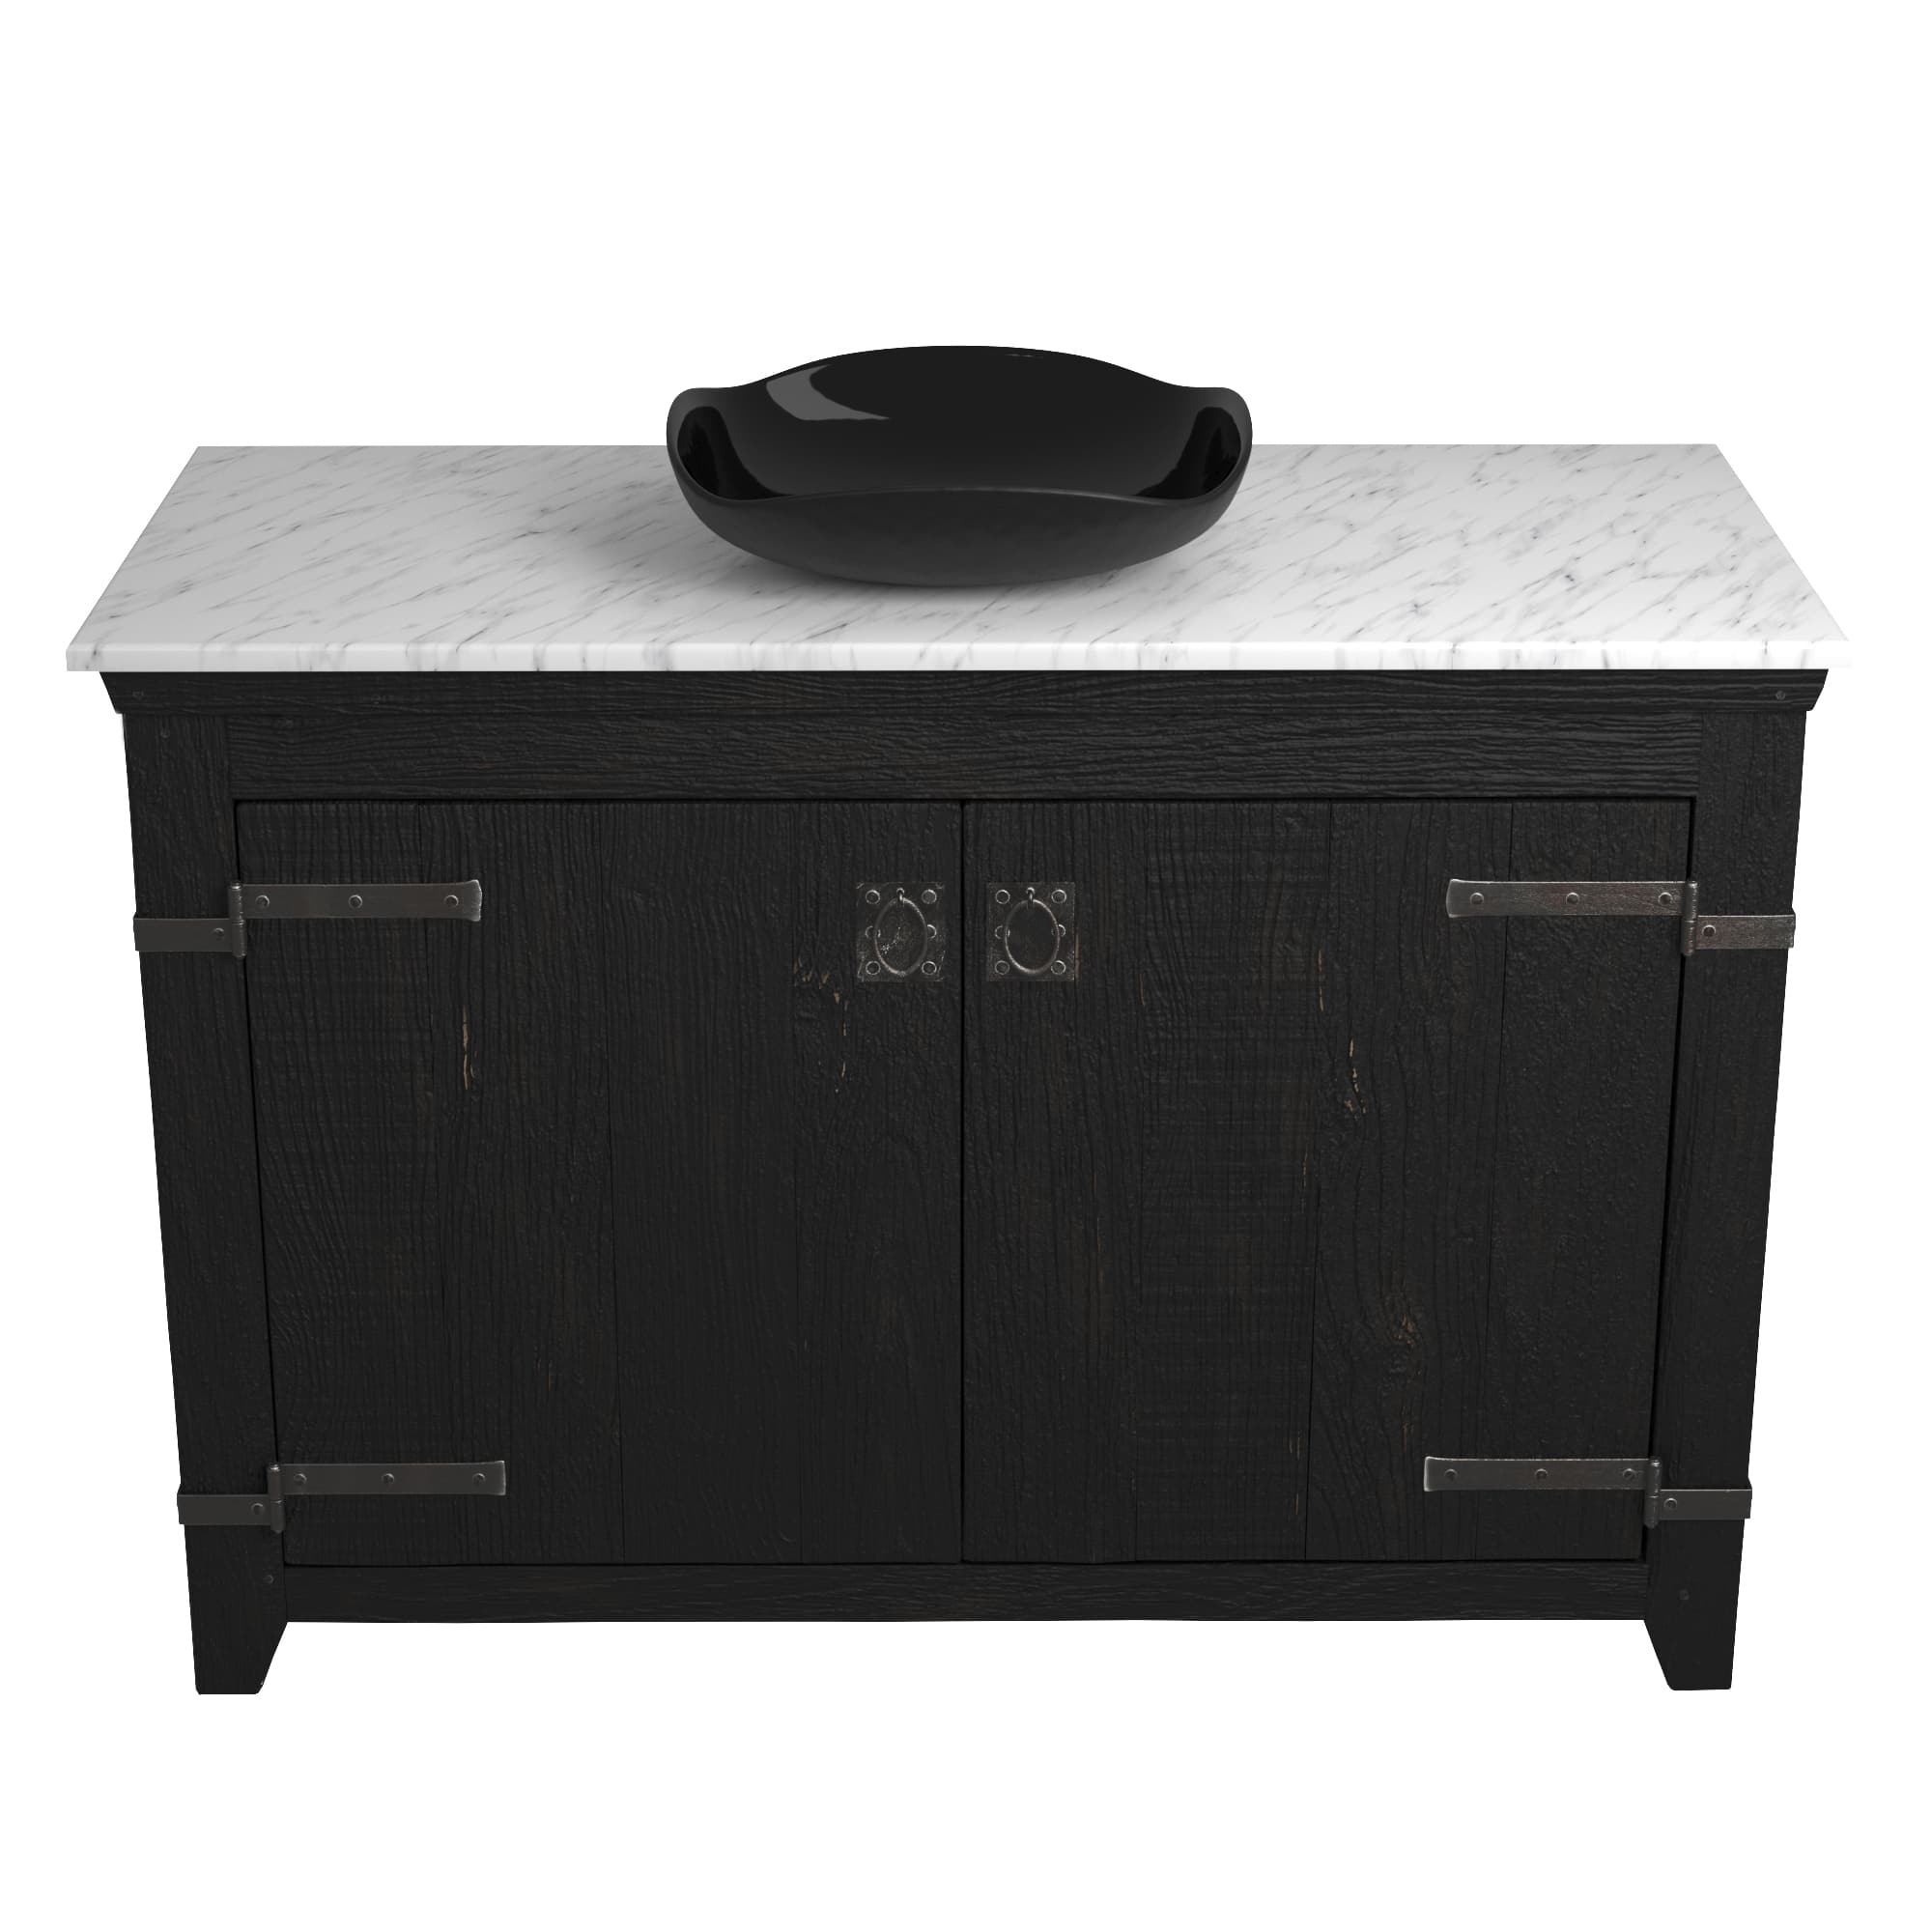 Native Trails 48" Americana Vanity in Anvil with Carrara Marble Top and Lido in Abyss, Single Faucet Hole, BND48-VB-CT-MG-013